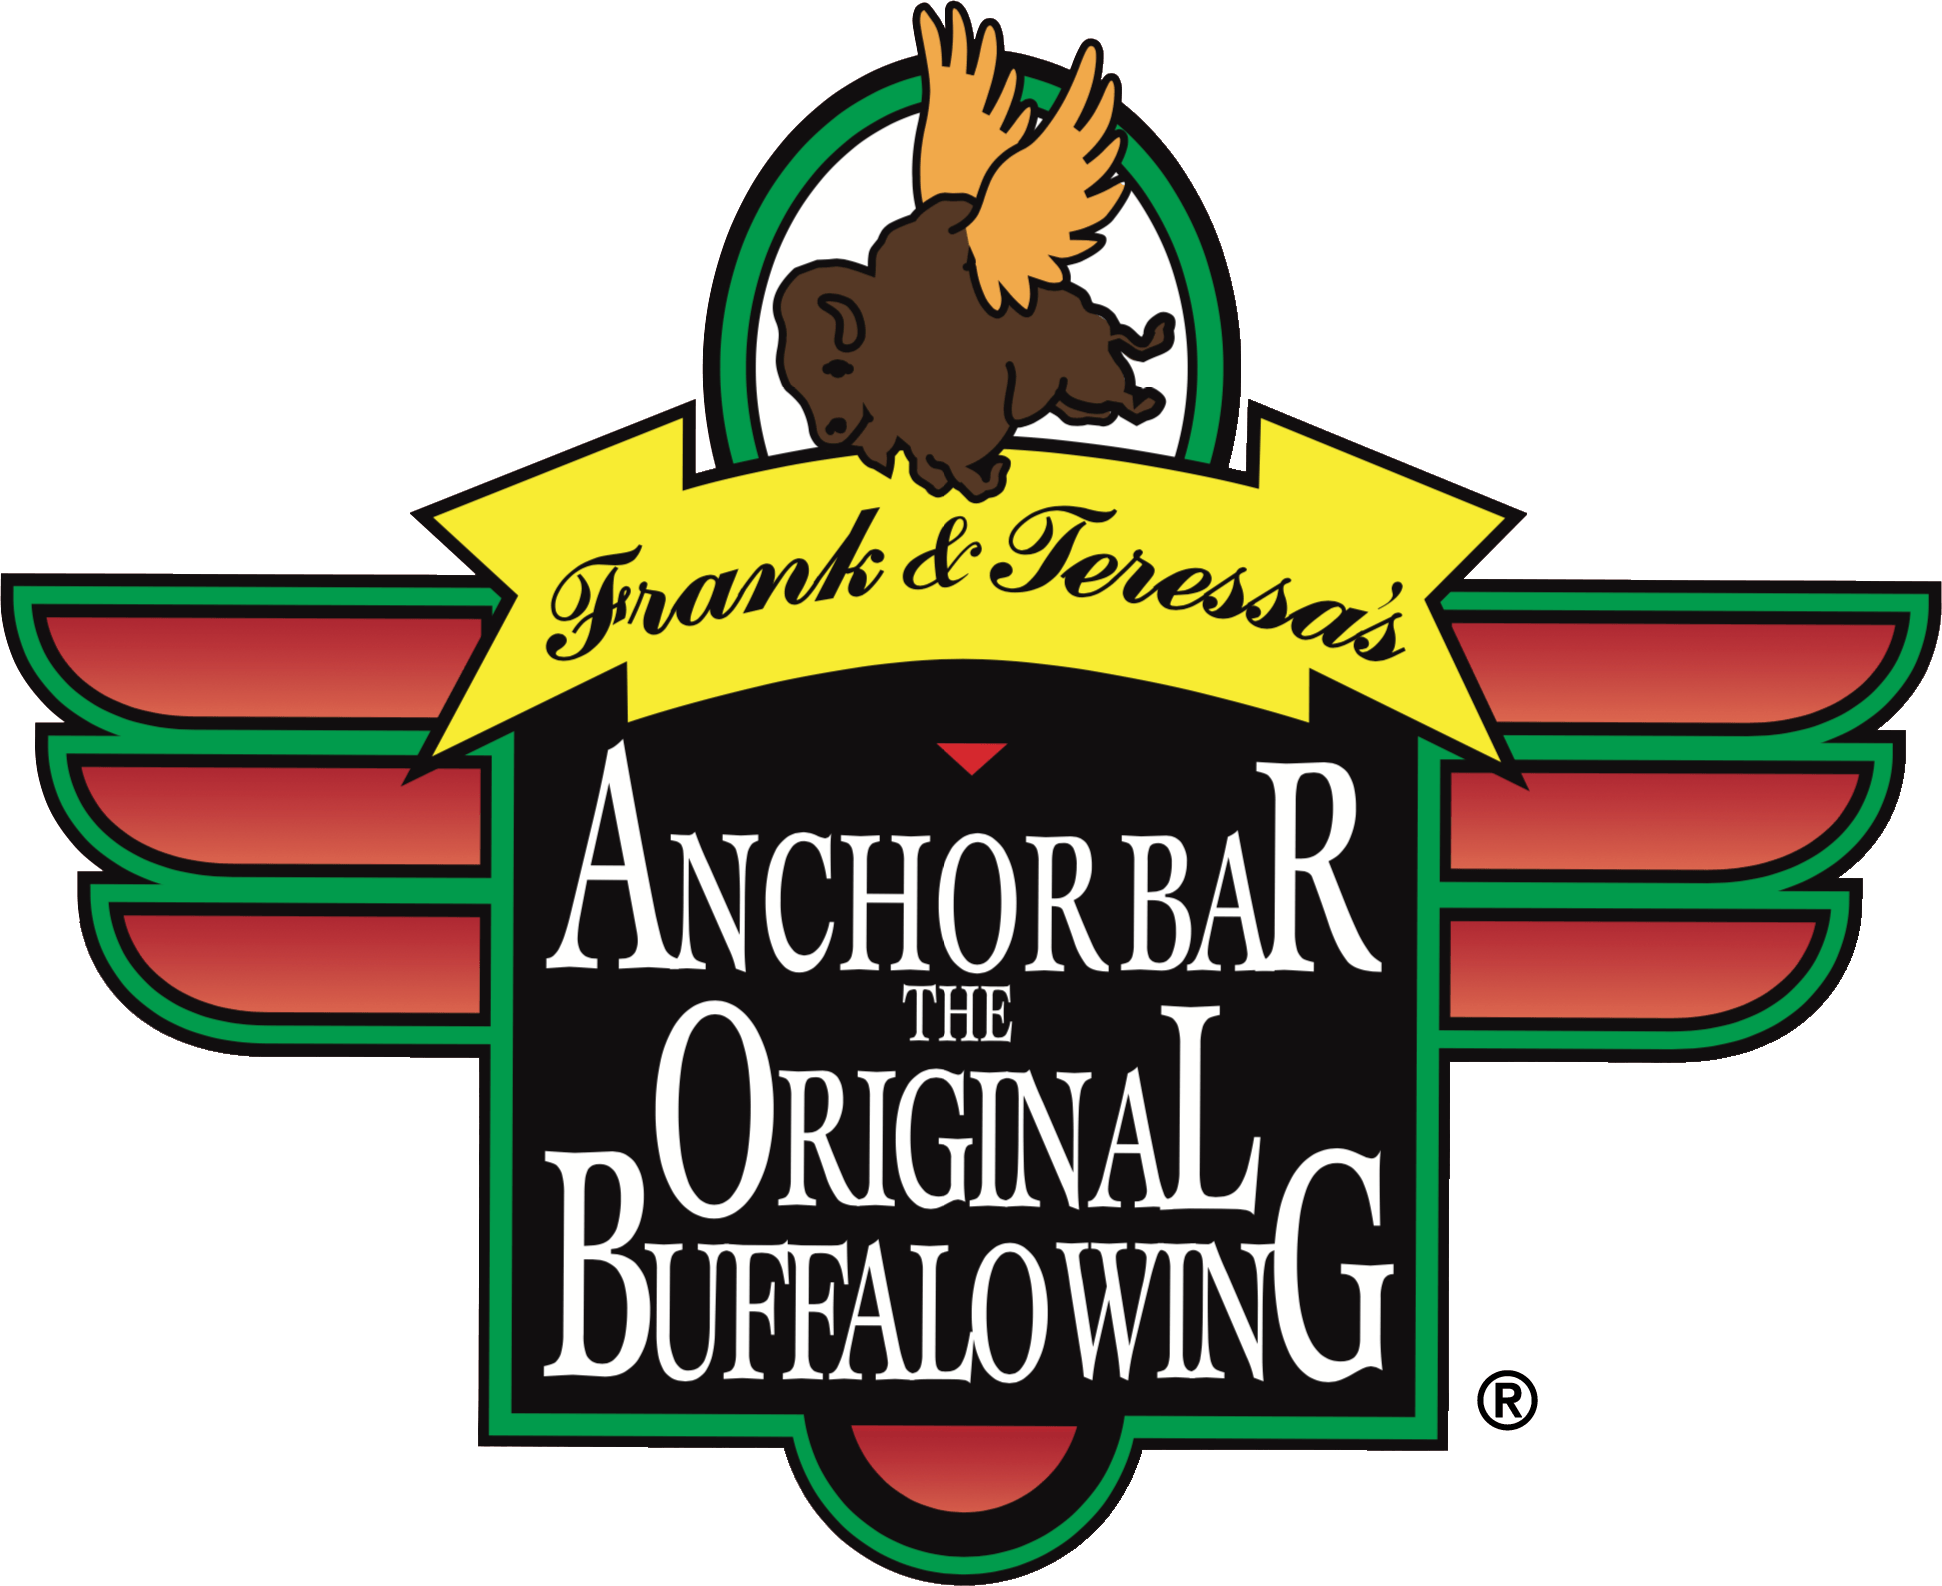 Anchor Bar Restaurant Brings America's Favorite Food to Round Rock as Local Owners TJ and Erin Mahoney Usher in Original Buffalo Chicken Wing Franchise with Local Dignitaries and Friends